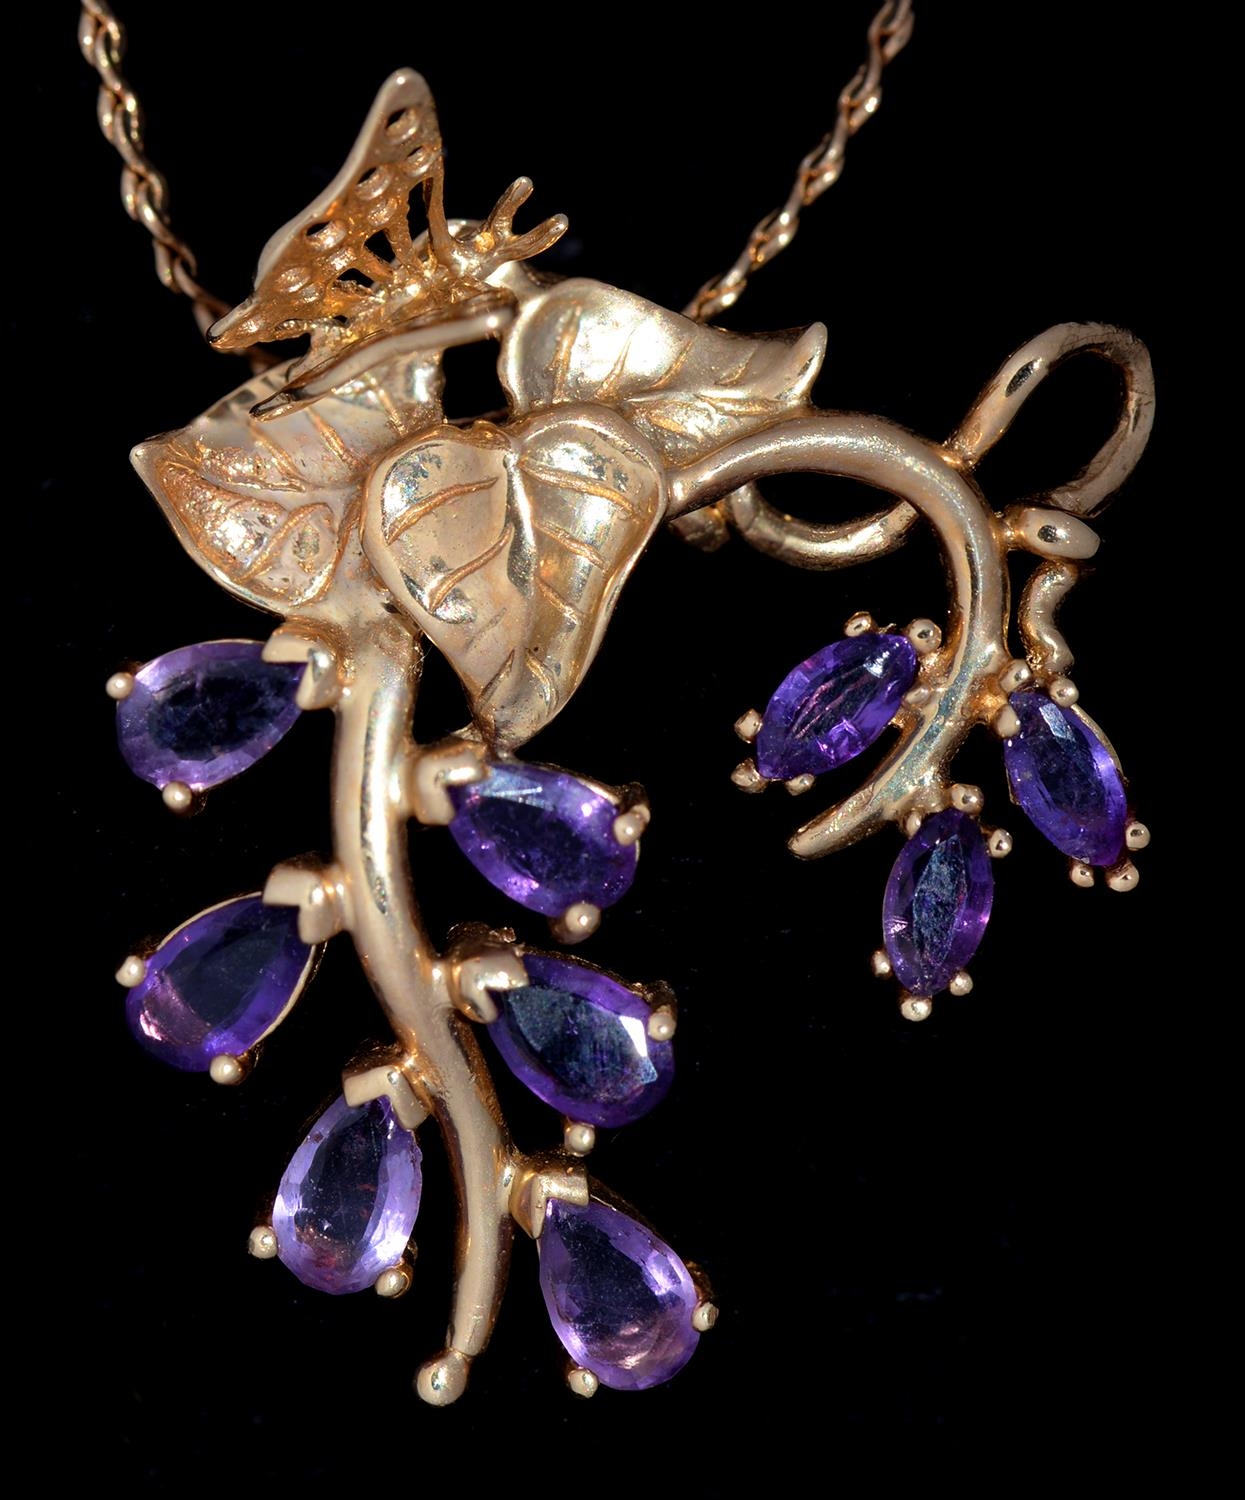 An amethyst flower pendant, in 14ct gold,  31mm, by The Franklin Mint, import marked London 1981 and